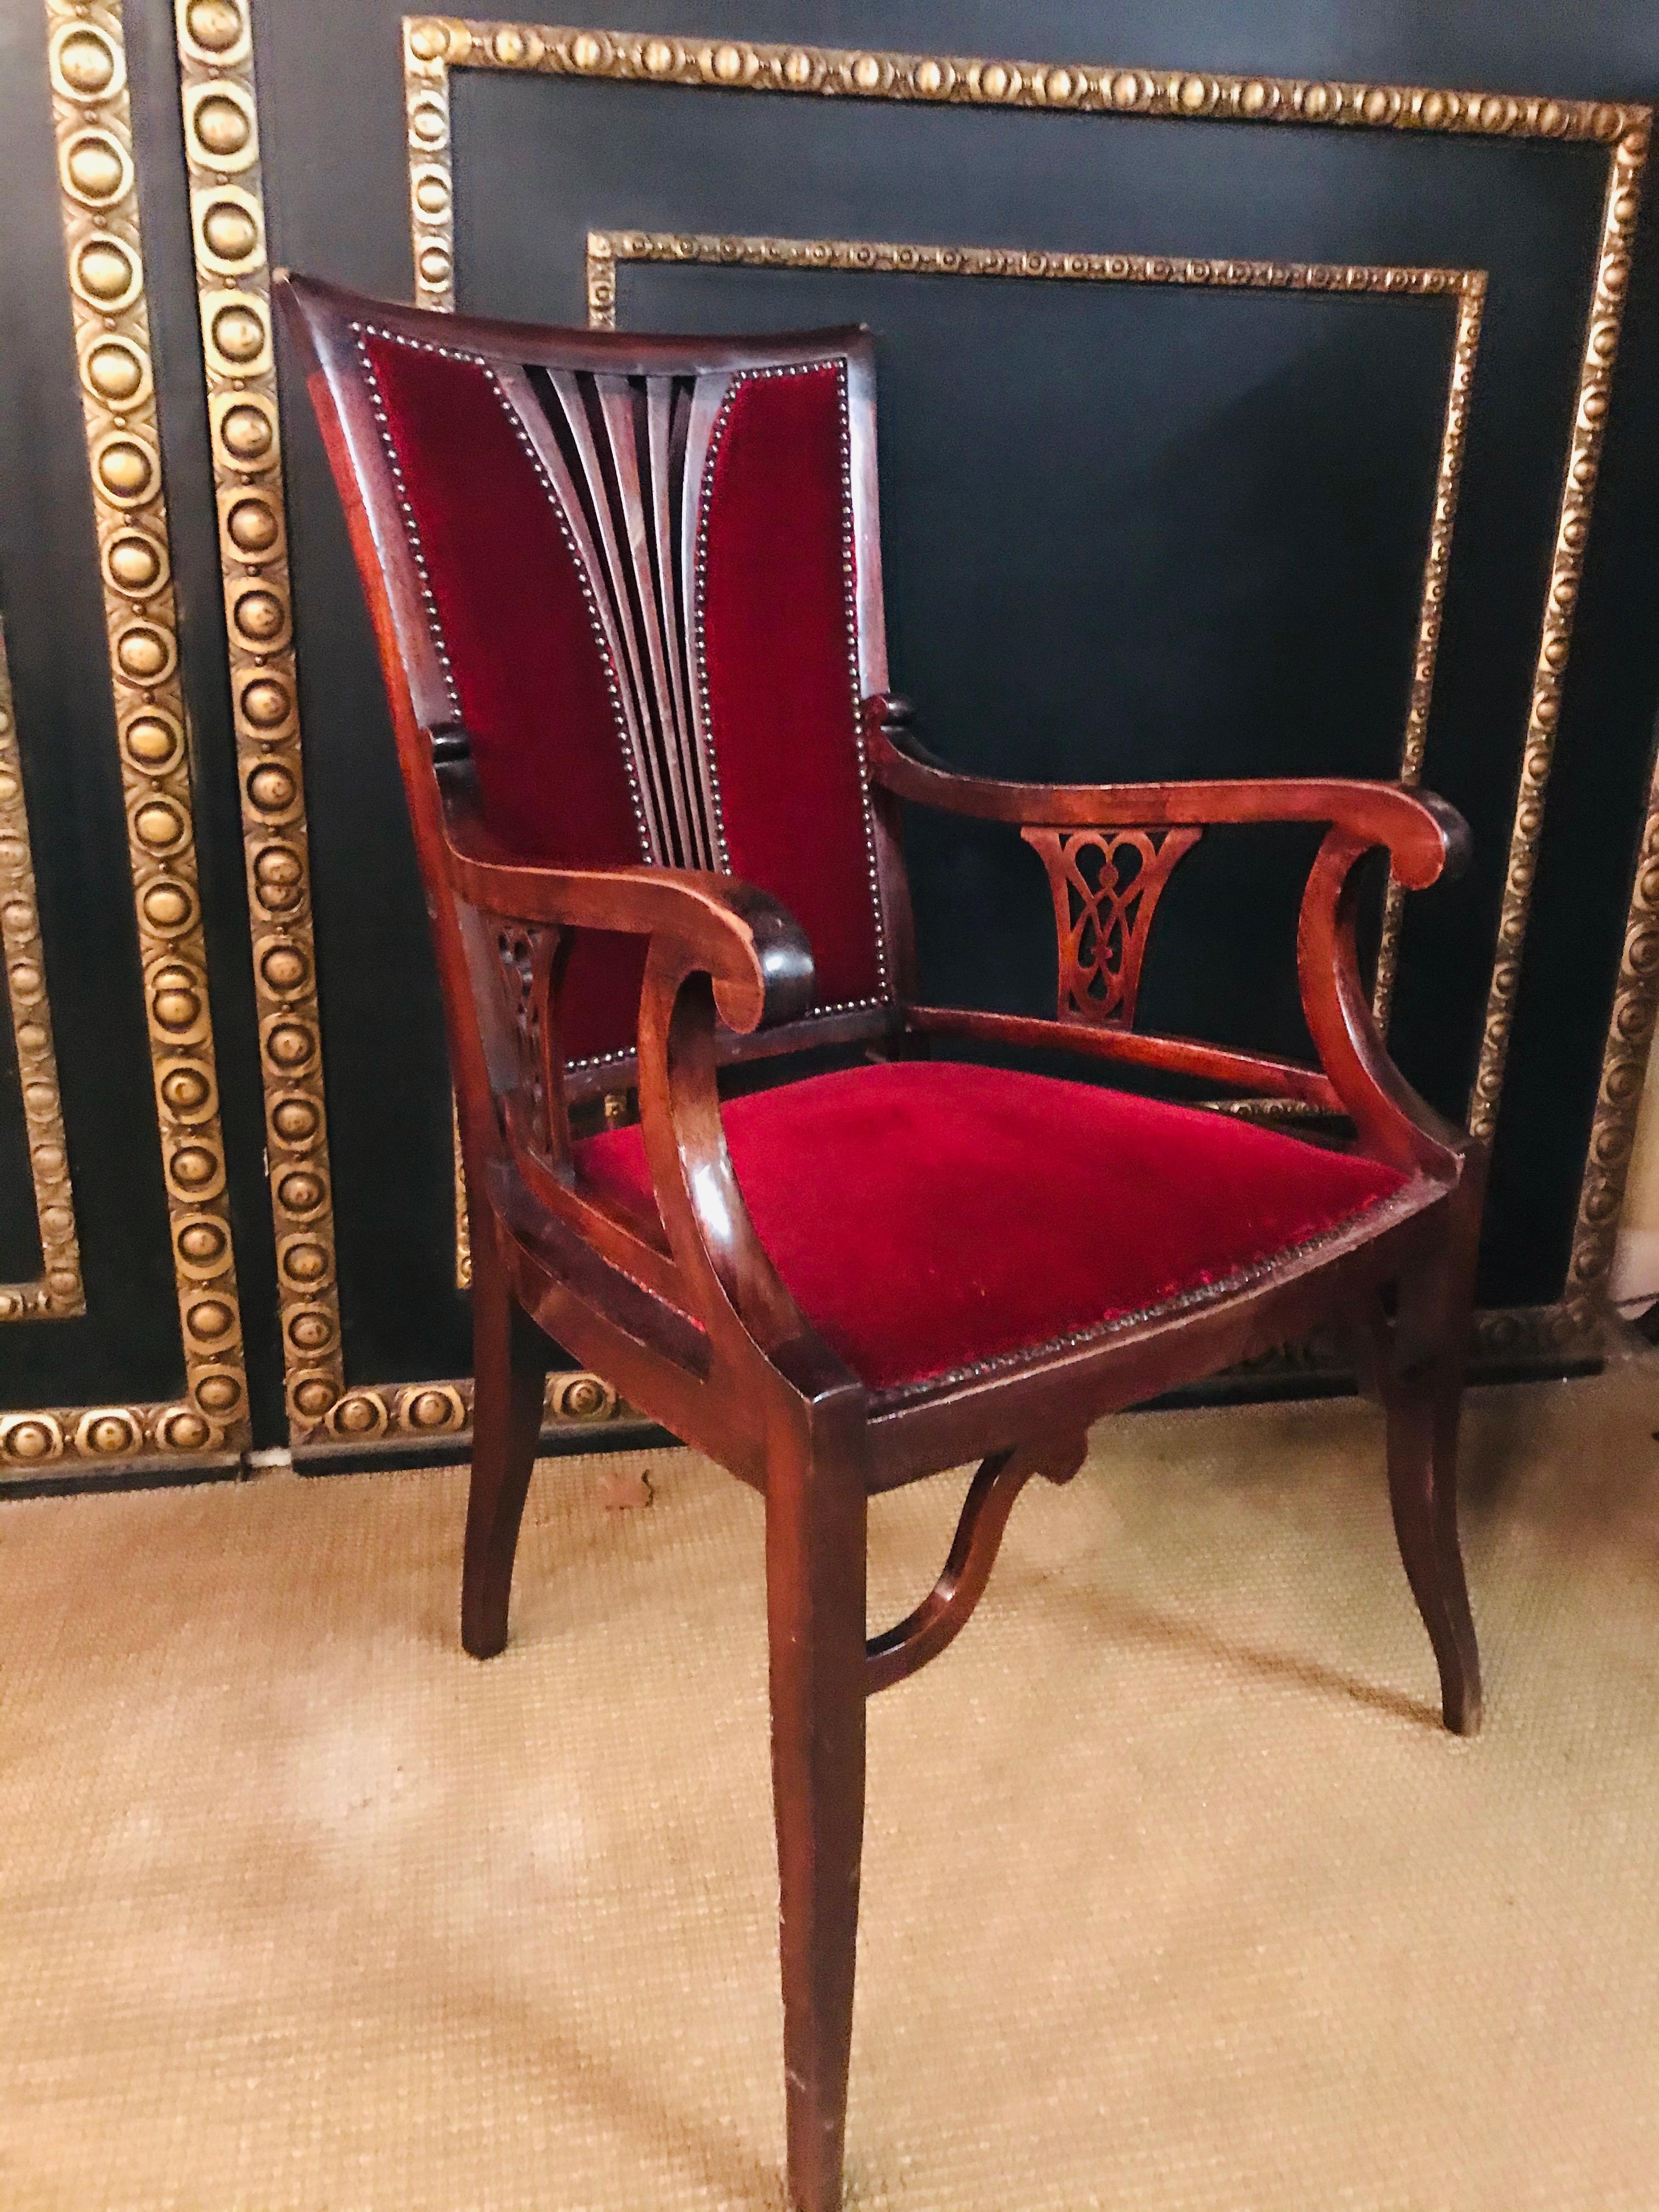 Beautiful antique red Art Nouveau or Jugendstil 20th Century Armchair mahogany  1